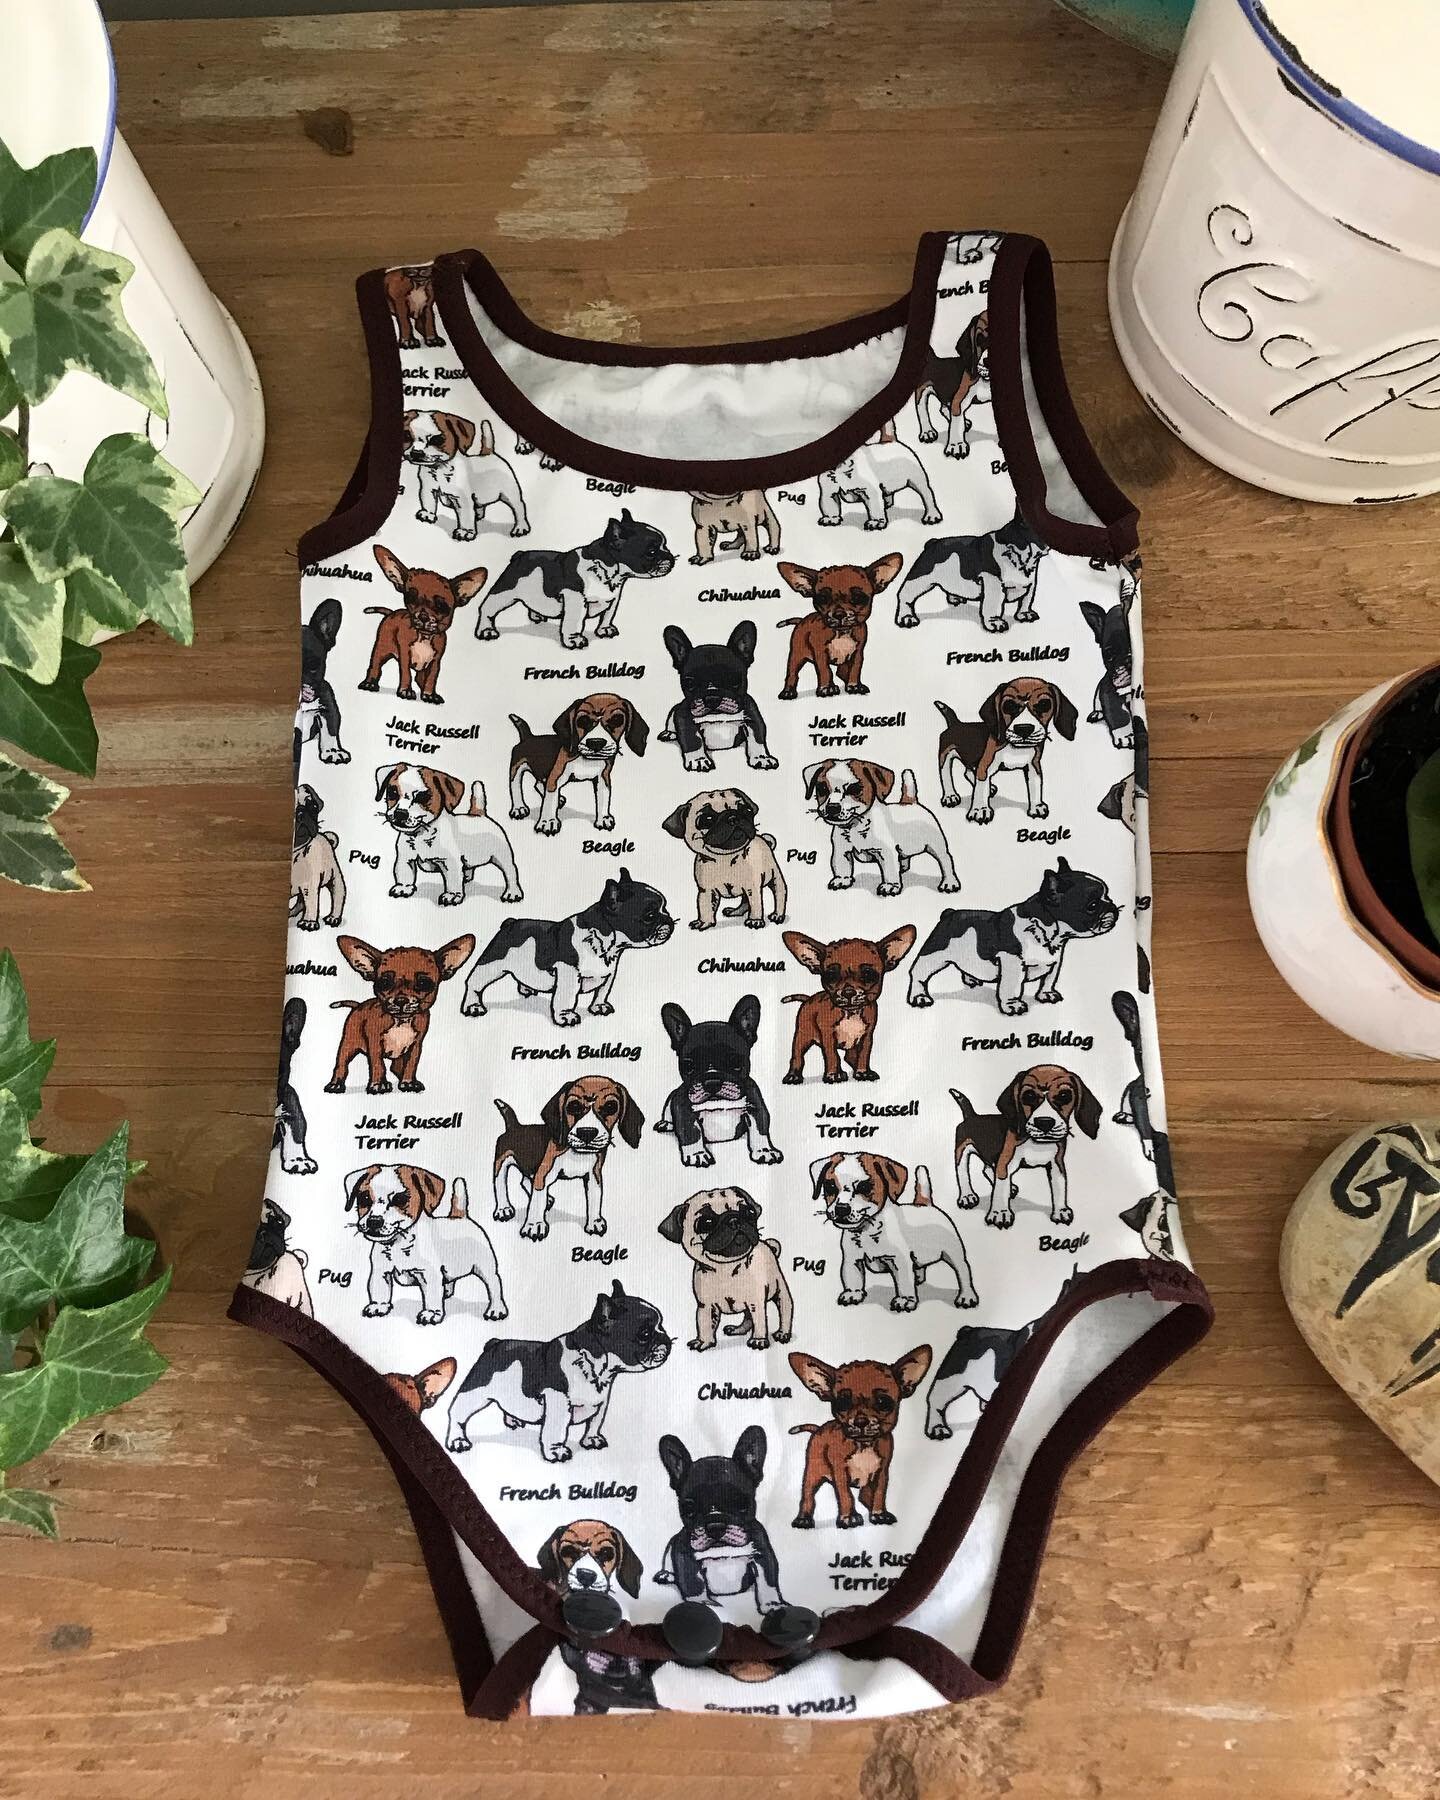 Onesies galore. Made a few more onesies for my granddaughter. 

#baby #gift #sewing #onesie #bodysuit #giftideas #giftidea #babyshower #fun #animal #animalprint #dog #dogs #puppies #homemade #memade #handmade #madewithlove #sewingfun #roses #rose #fl